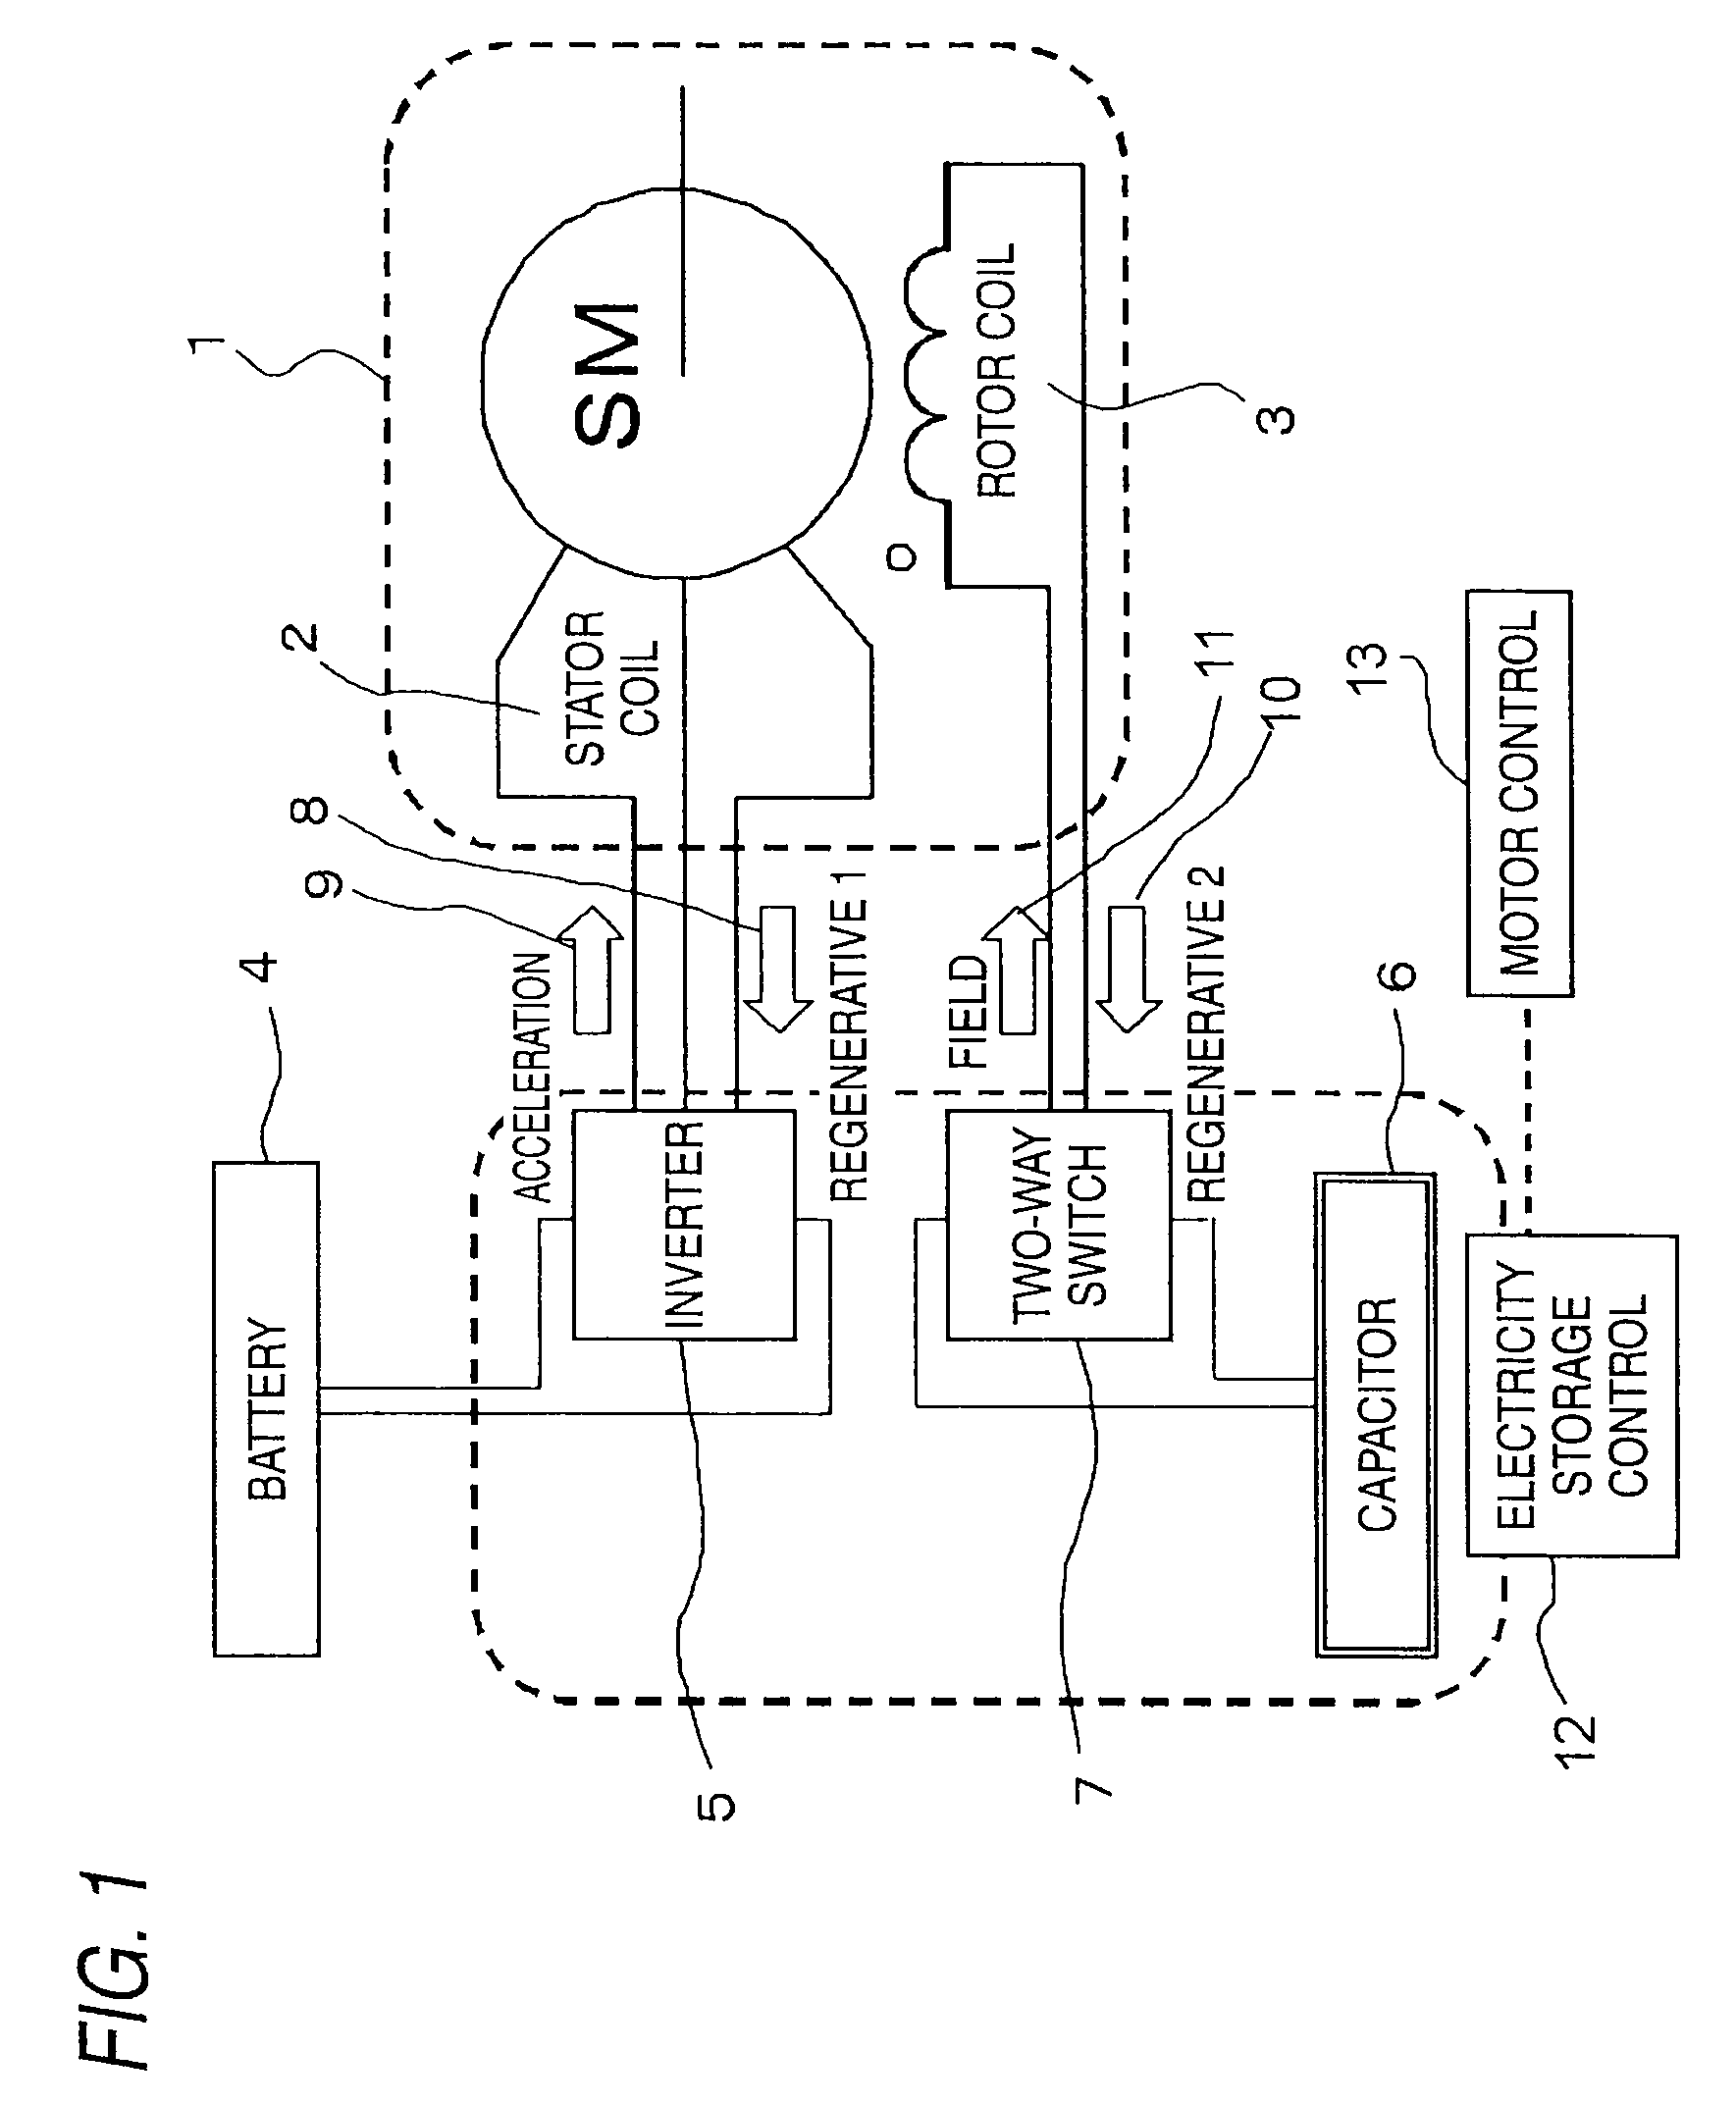 Regenerating braking system including synchronous motor with field excitation and control method thereof